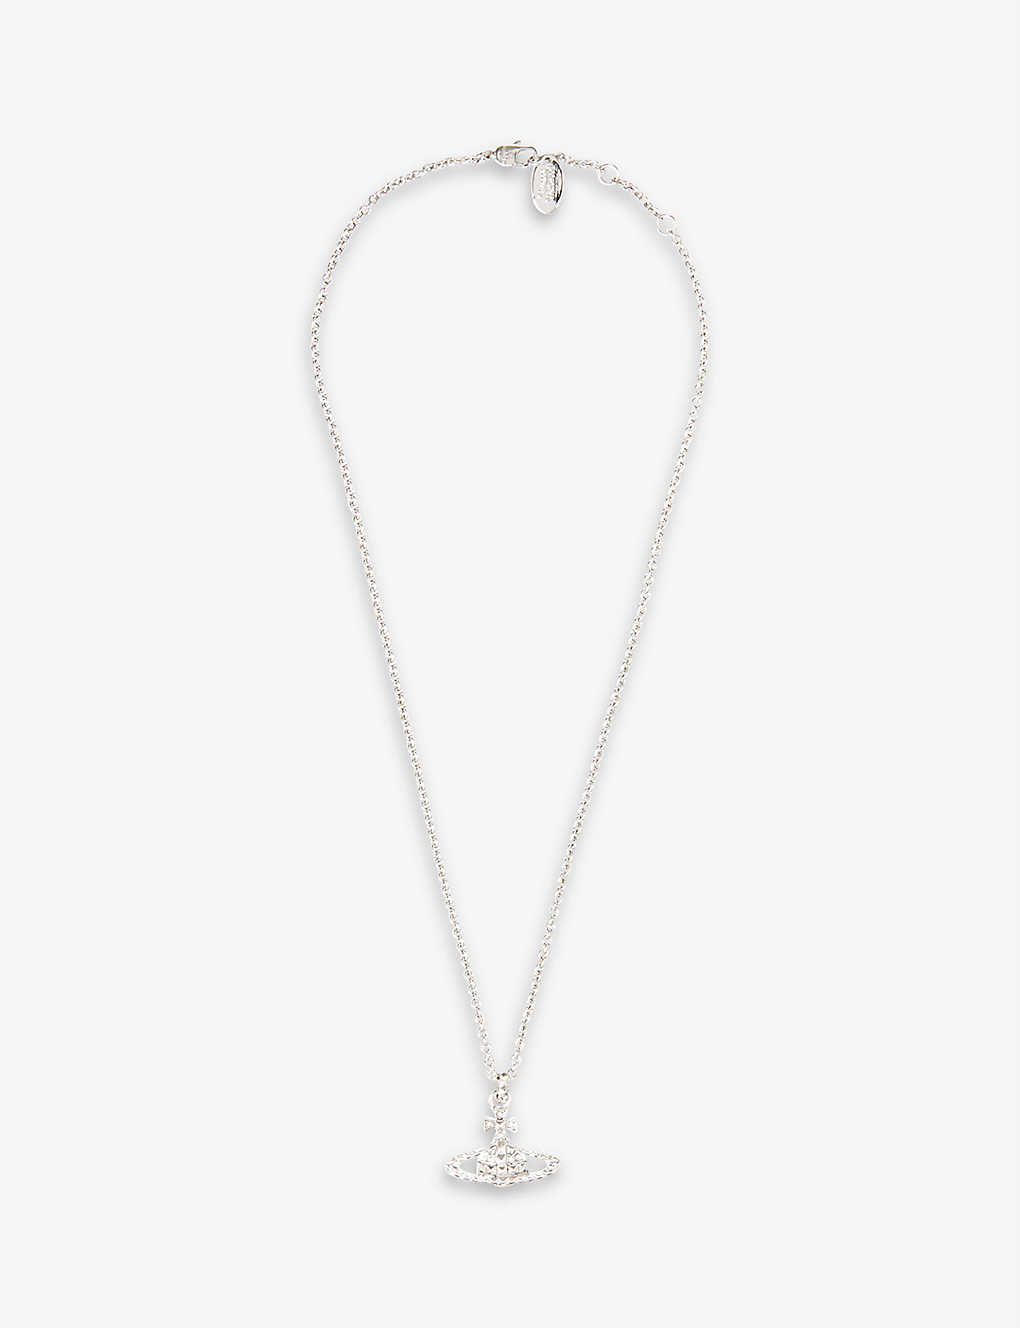 VIVIENNE WESTWOOD JEWELLERY Mayfair Bas Relief rhodium-plated brass and crystal pendant necklace